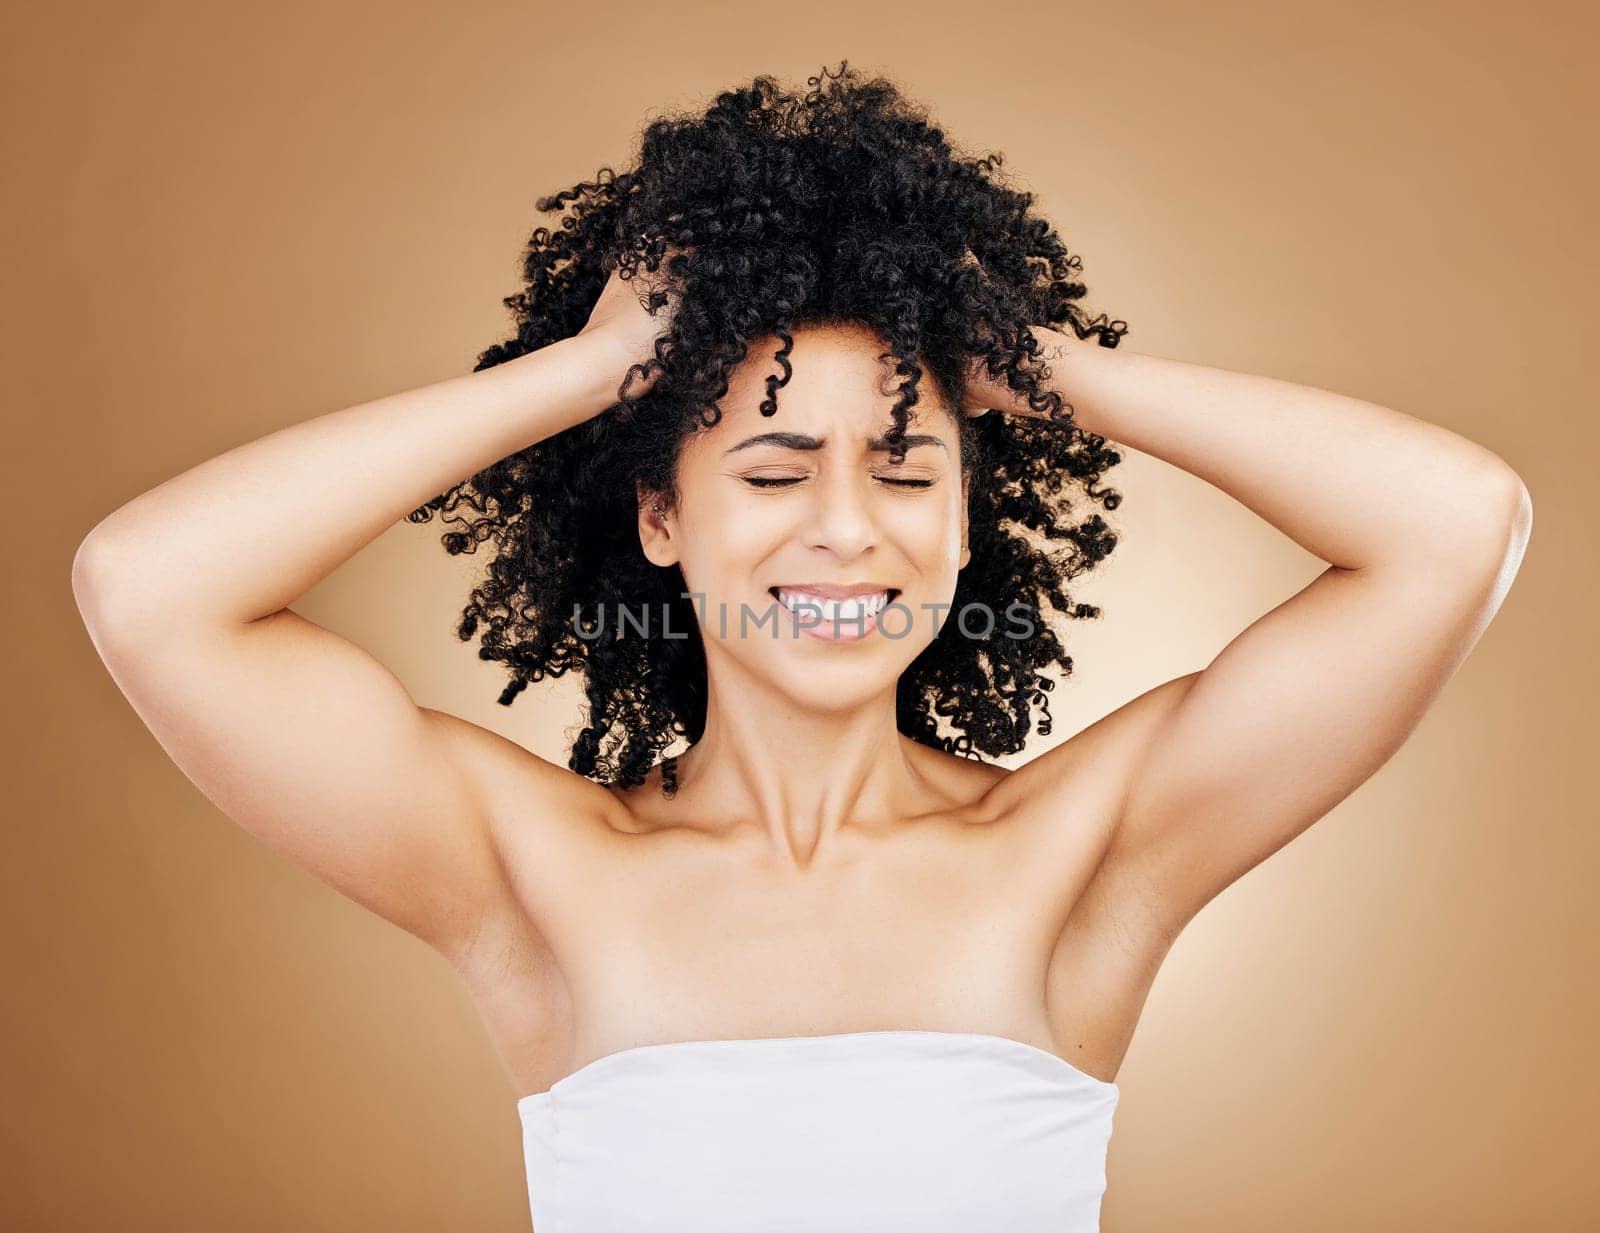 Woman, hair crisis and stress, beauty fail and salon treatment regret with frustration on studio brown background. Haircare disaster, cosmetics with pain, growth or texture mistake with headache.